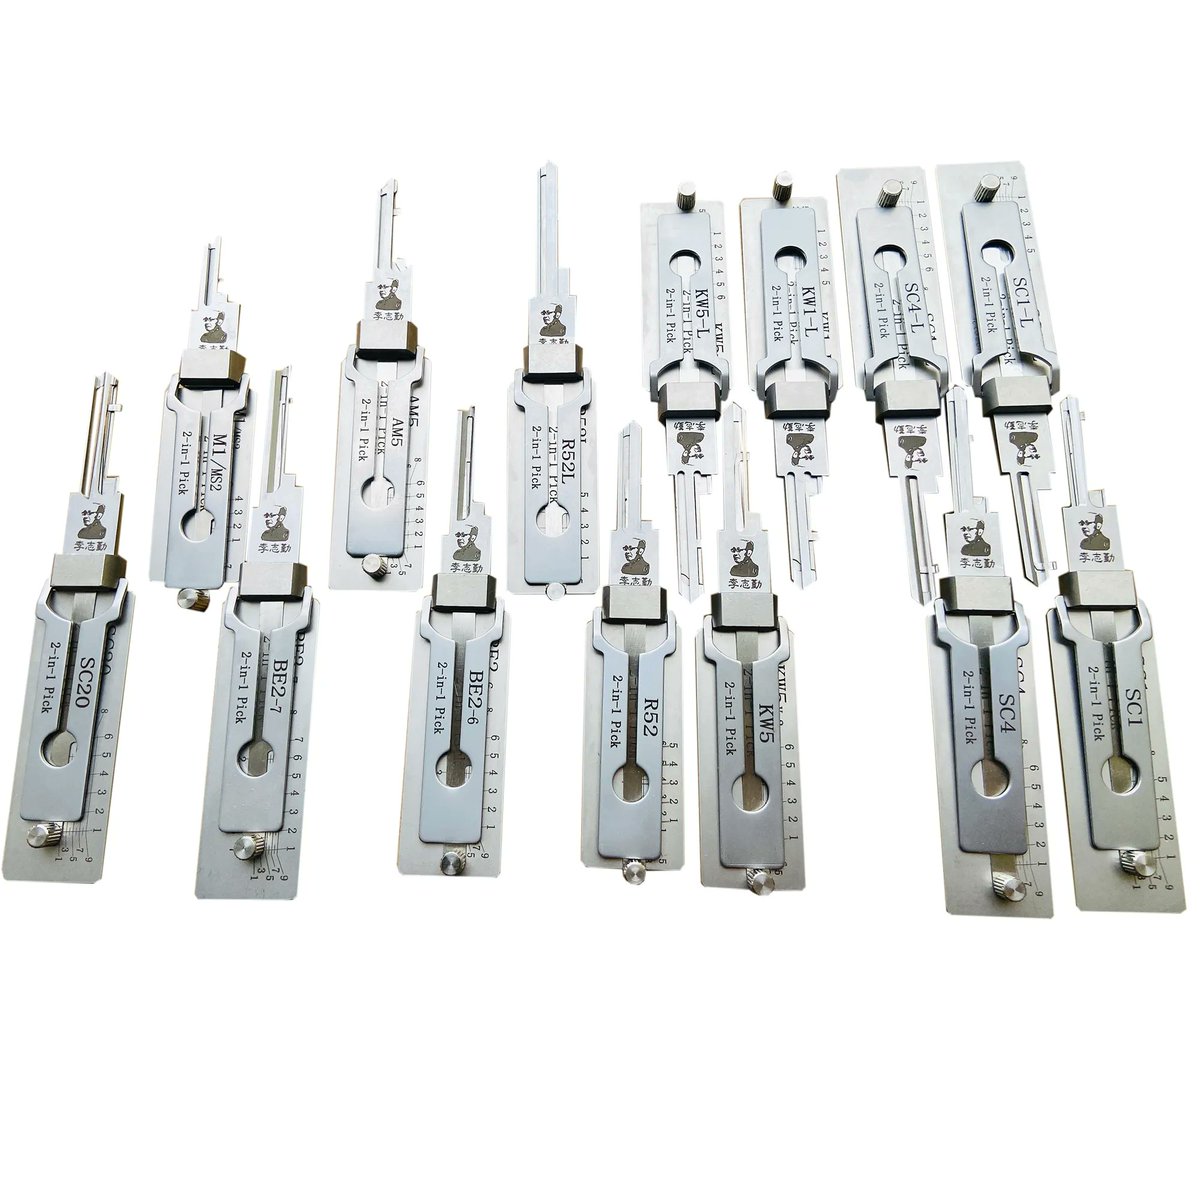 ⚙️ Lishi tools: made by locksmiths, for locksmiths. Pick locks, read wafers, make replacement keys – all in a time-saving way. #LocksmithLife